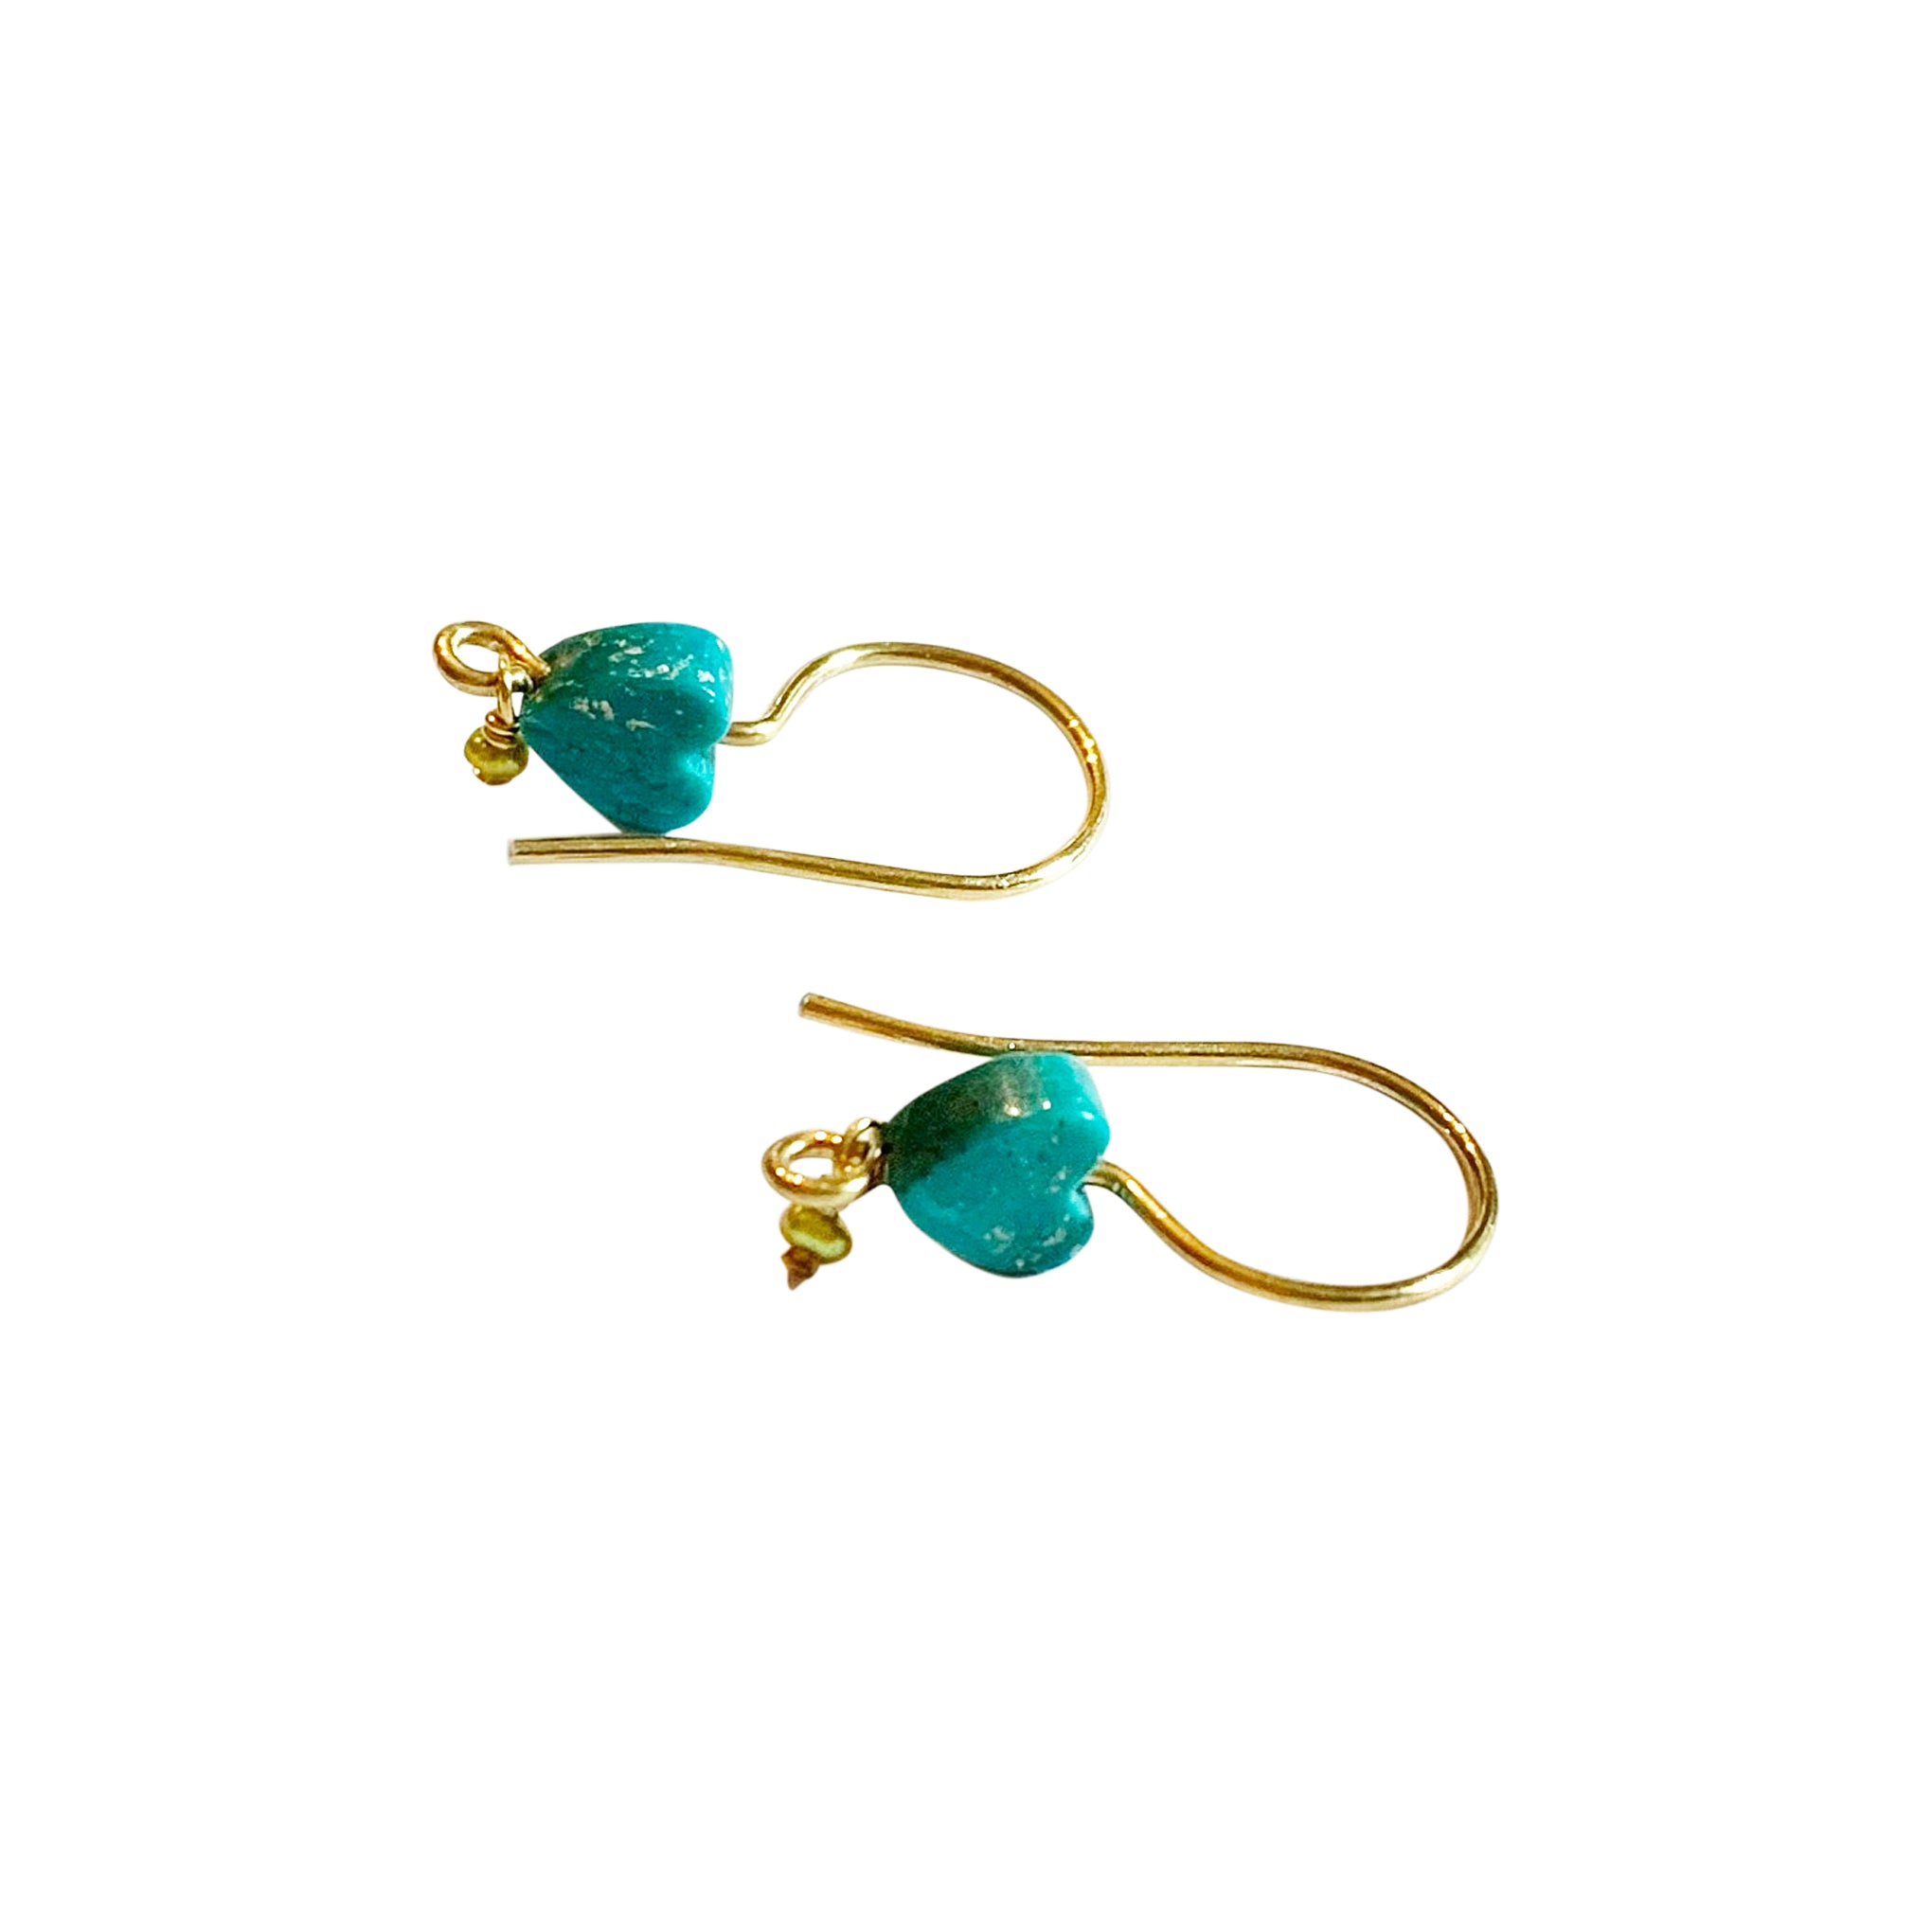 Chan Luu Petite Dangle Heart Charm Earrings in Turquoise Blue and Gold Vermeil